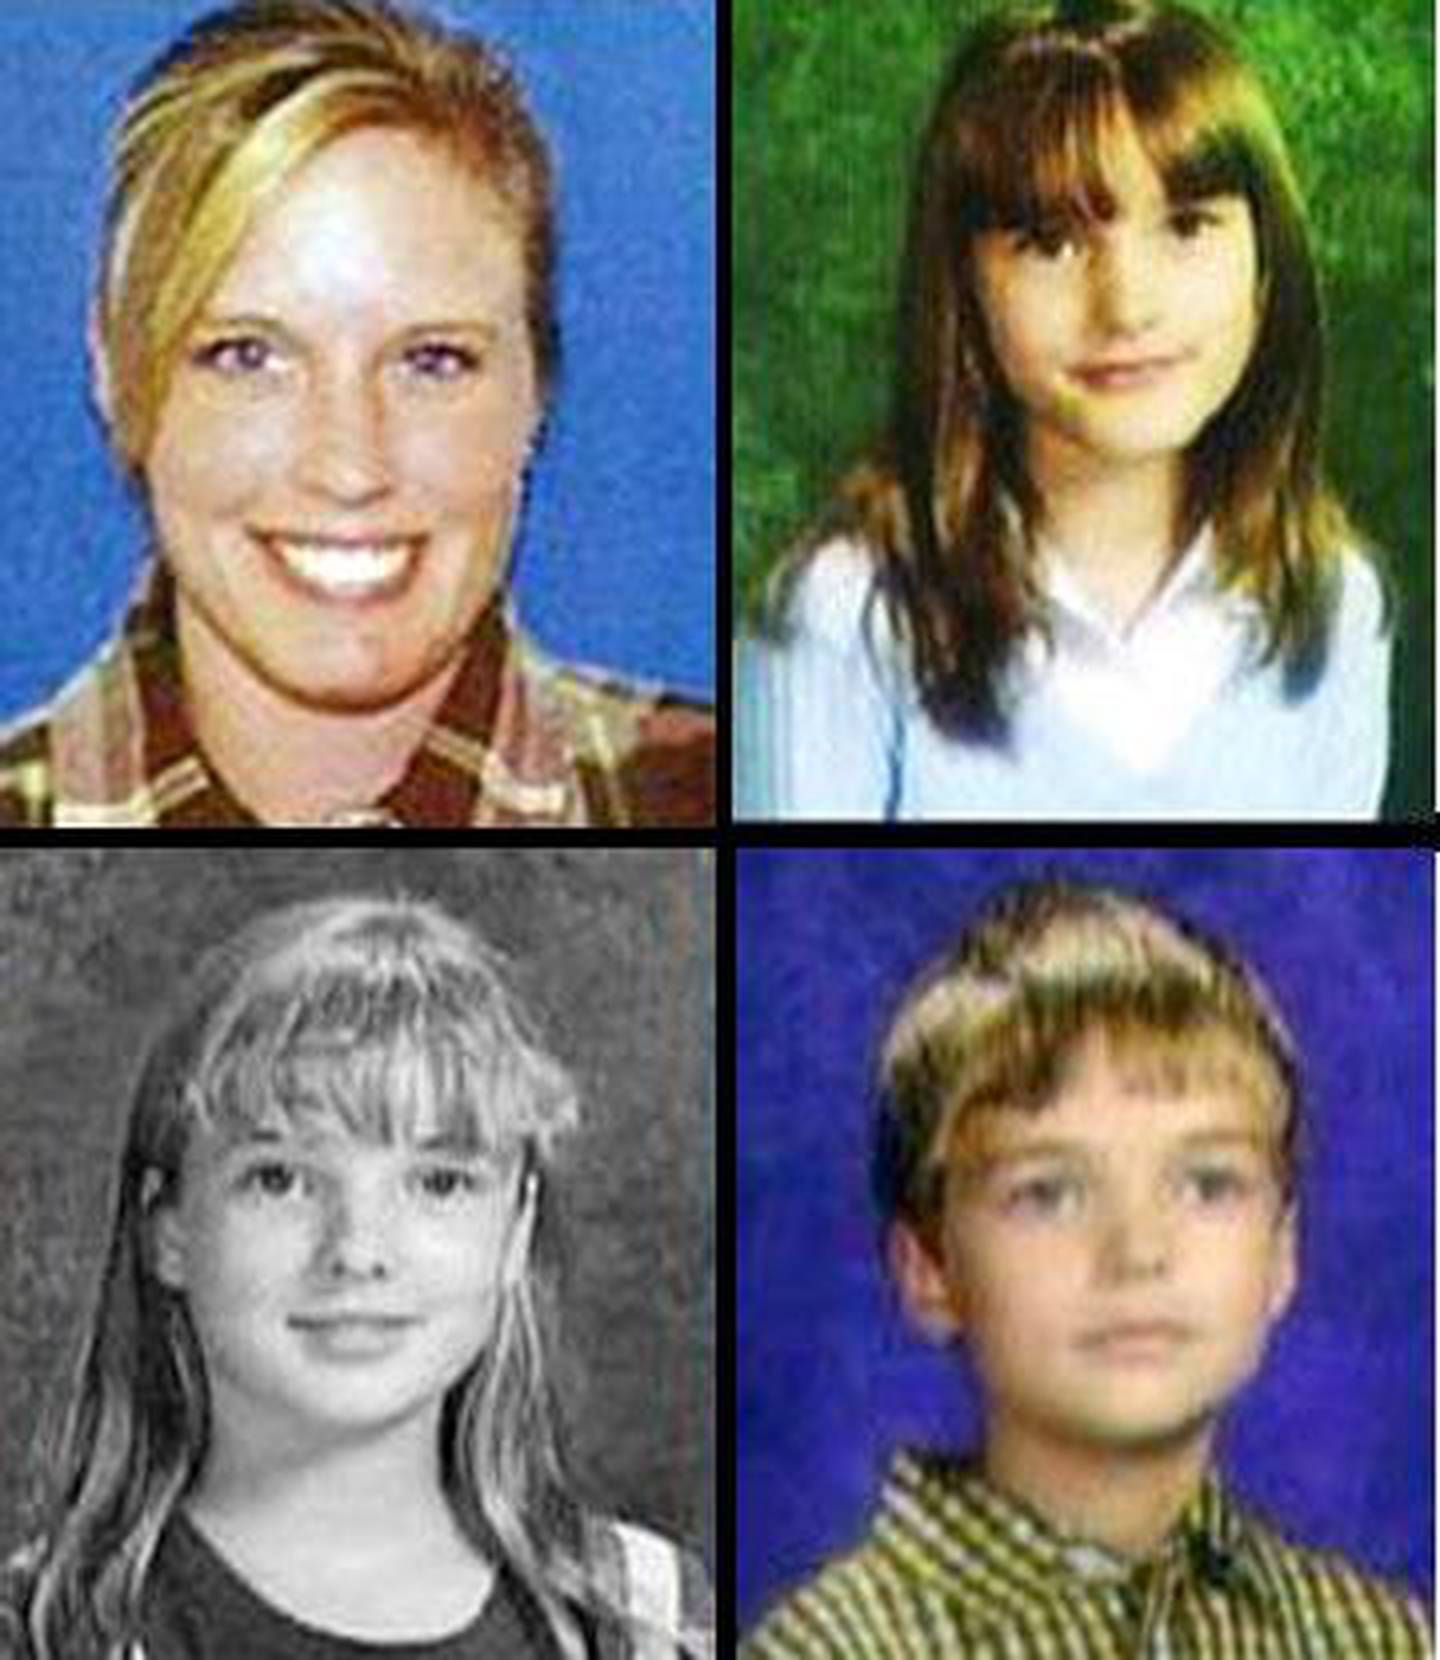 The bodies found in channahon Thursday morning were identified as Kimberly Vaughn, 34, and her three children Abigayle, 12, Cassandra, 11, and Blake, 8, all of Oswego.